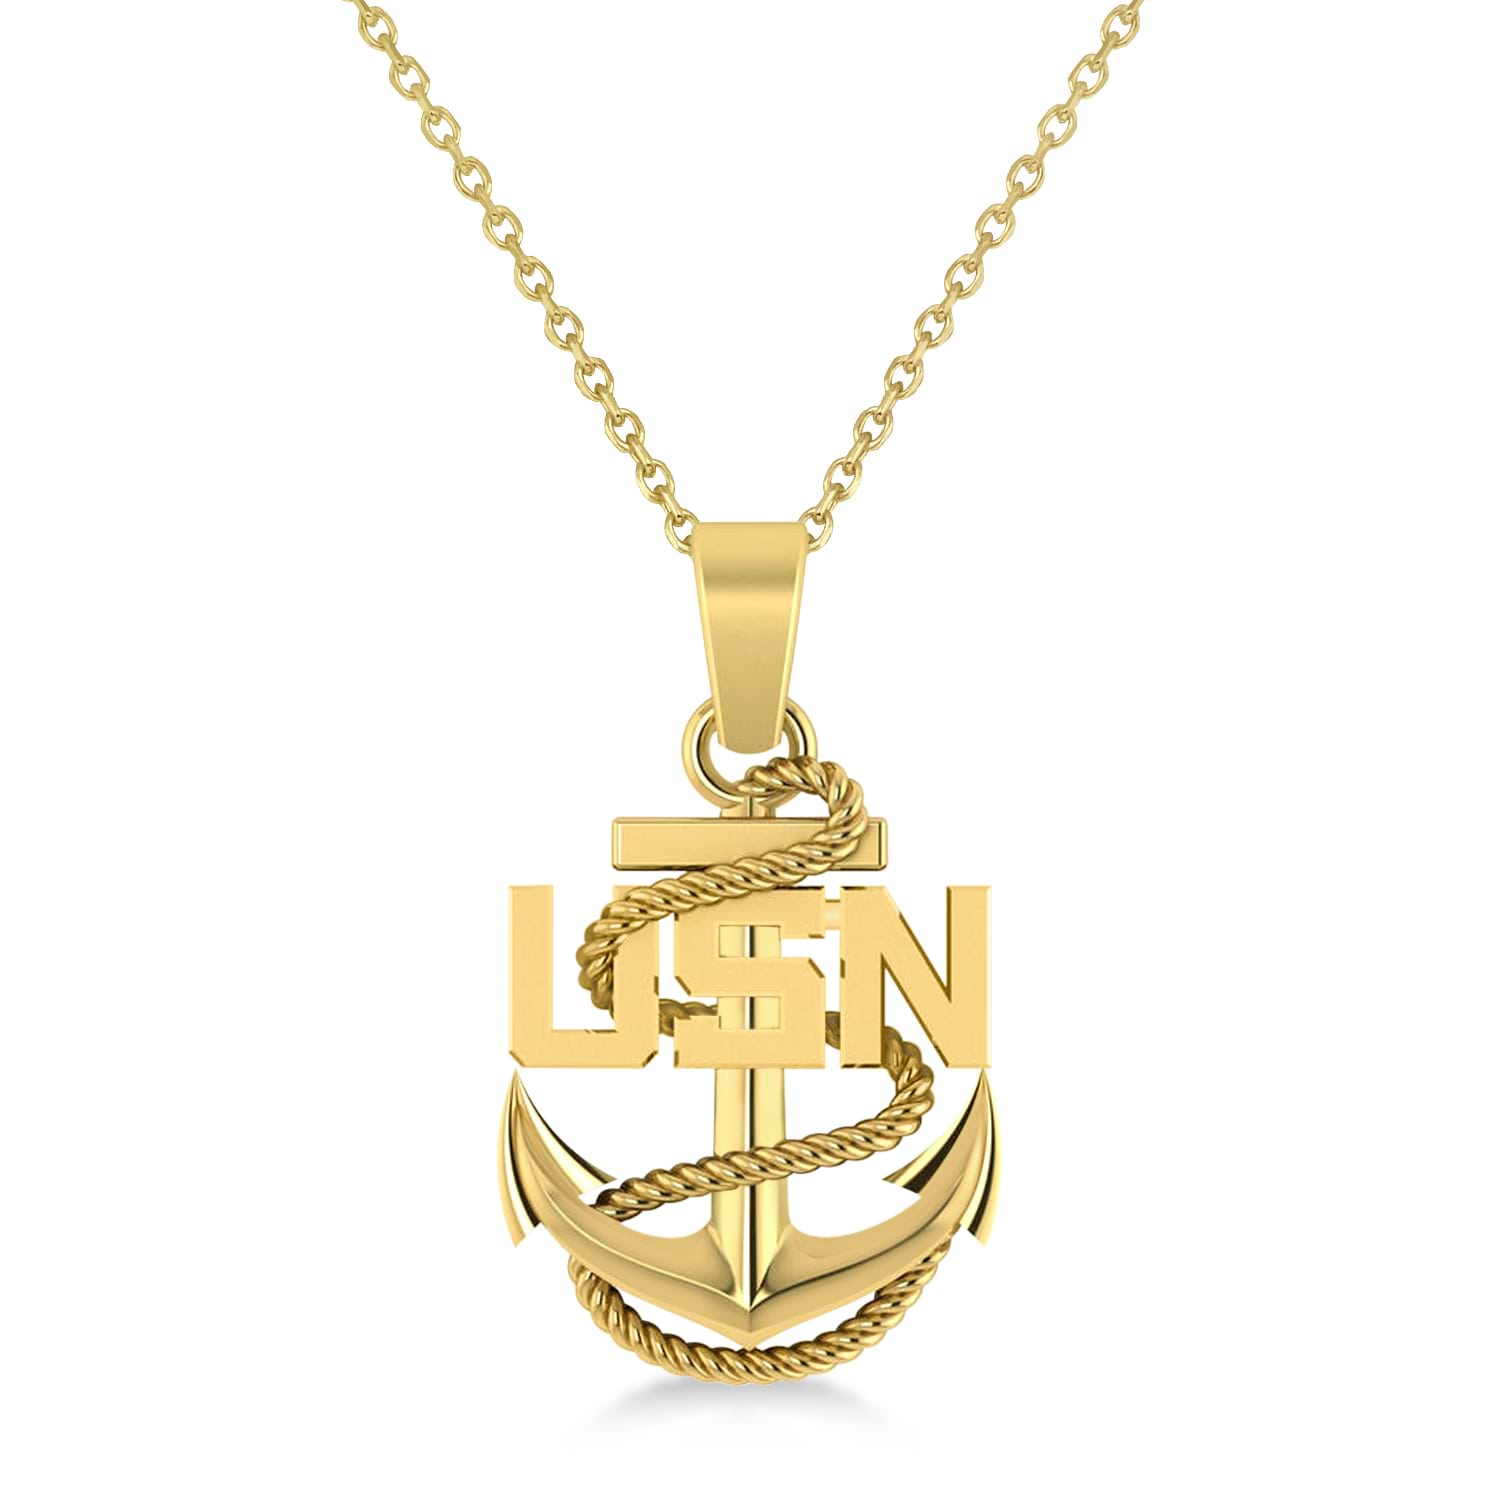 EunWow Anchor Pirate Black Chain Rocker Cool Nautical Gifts for Men Jewelry  Vintage Included 22'Chain | Amazon.com